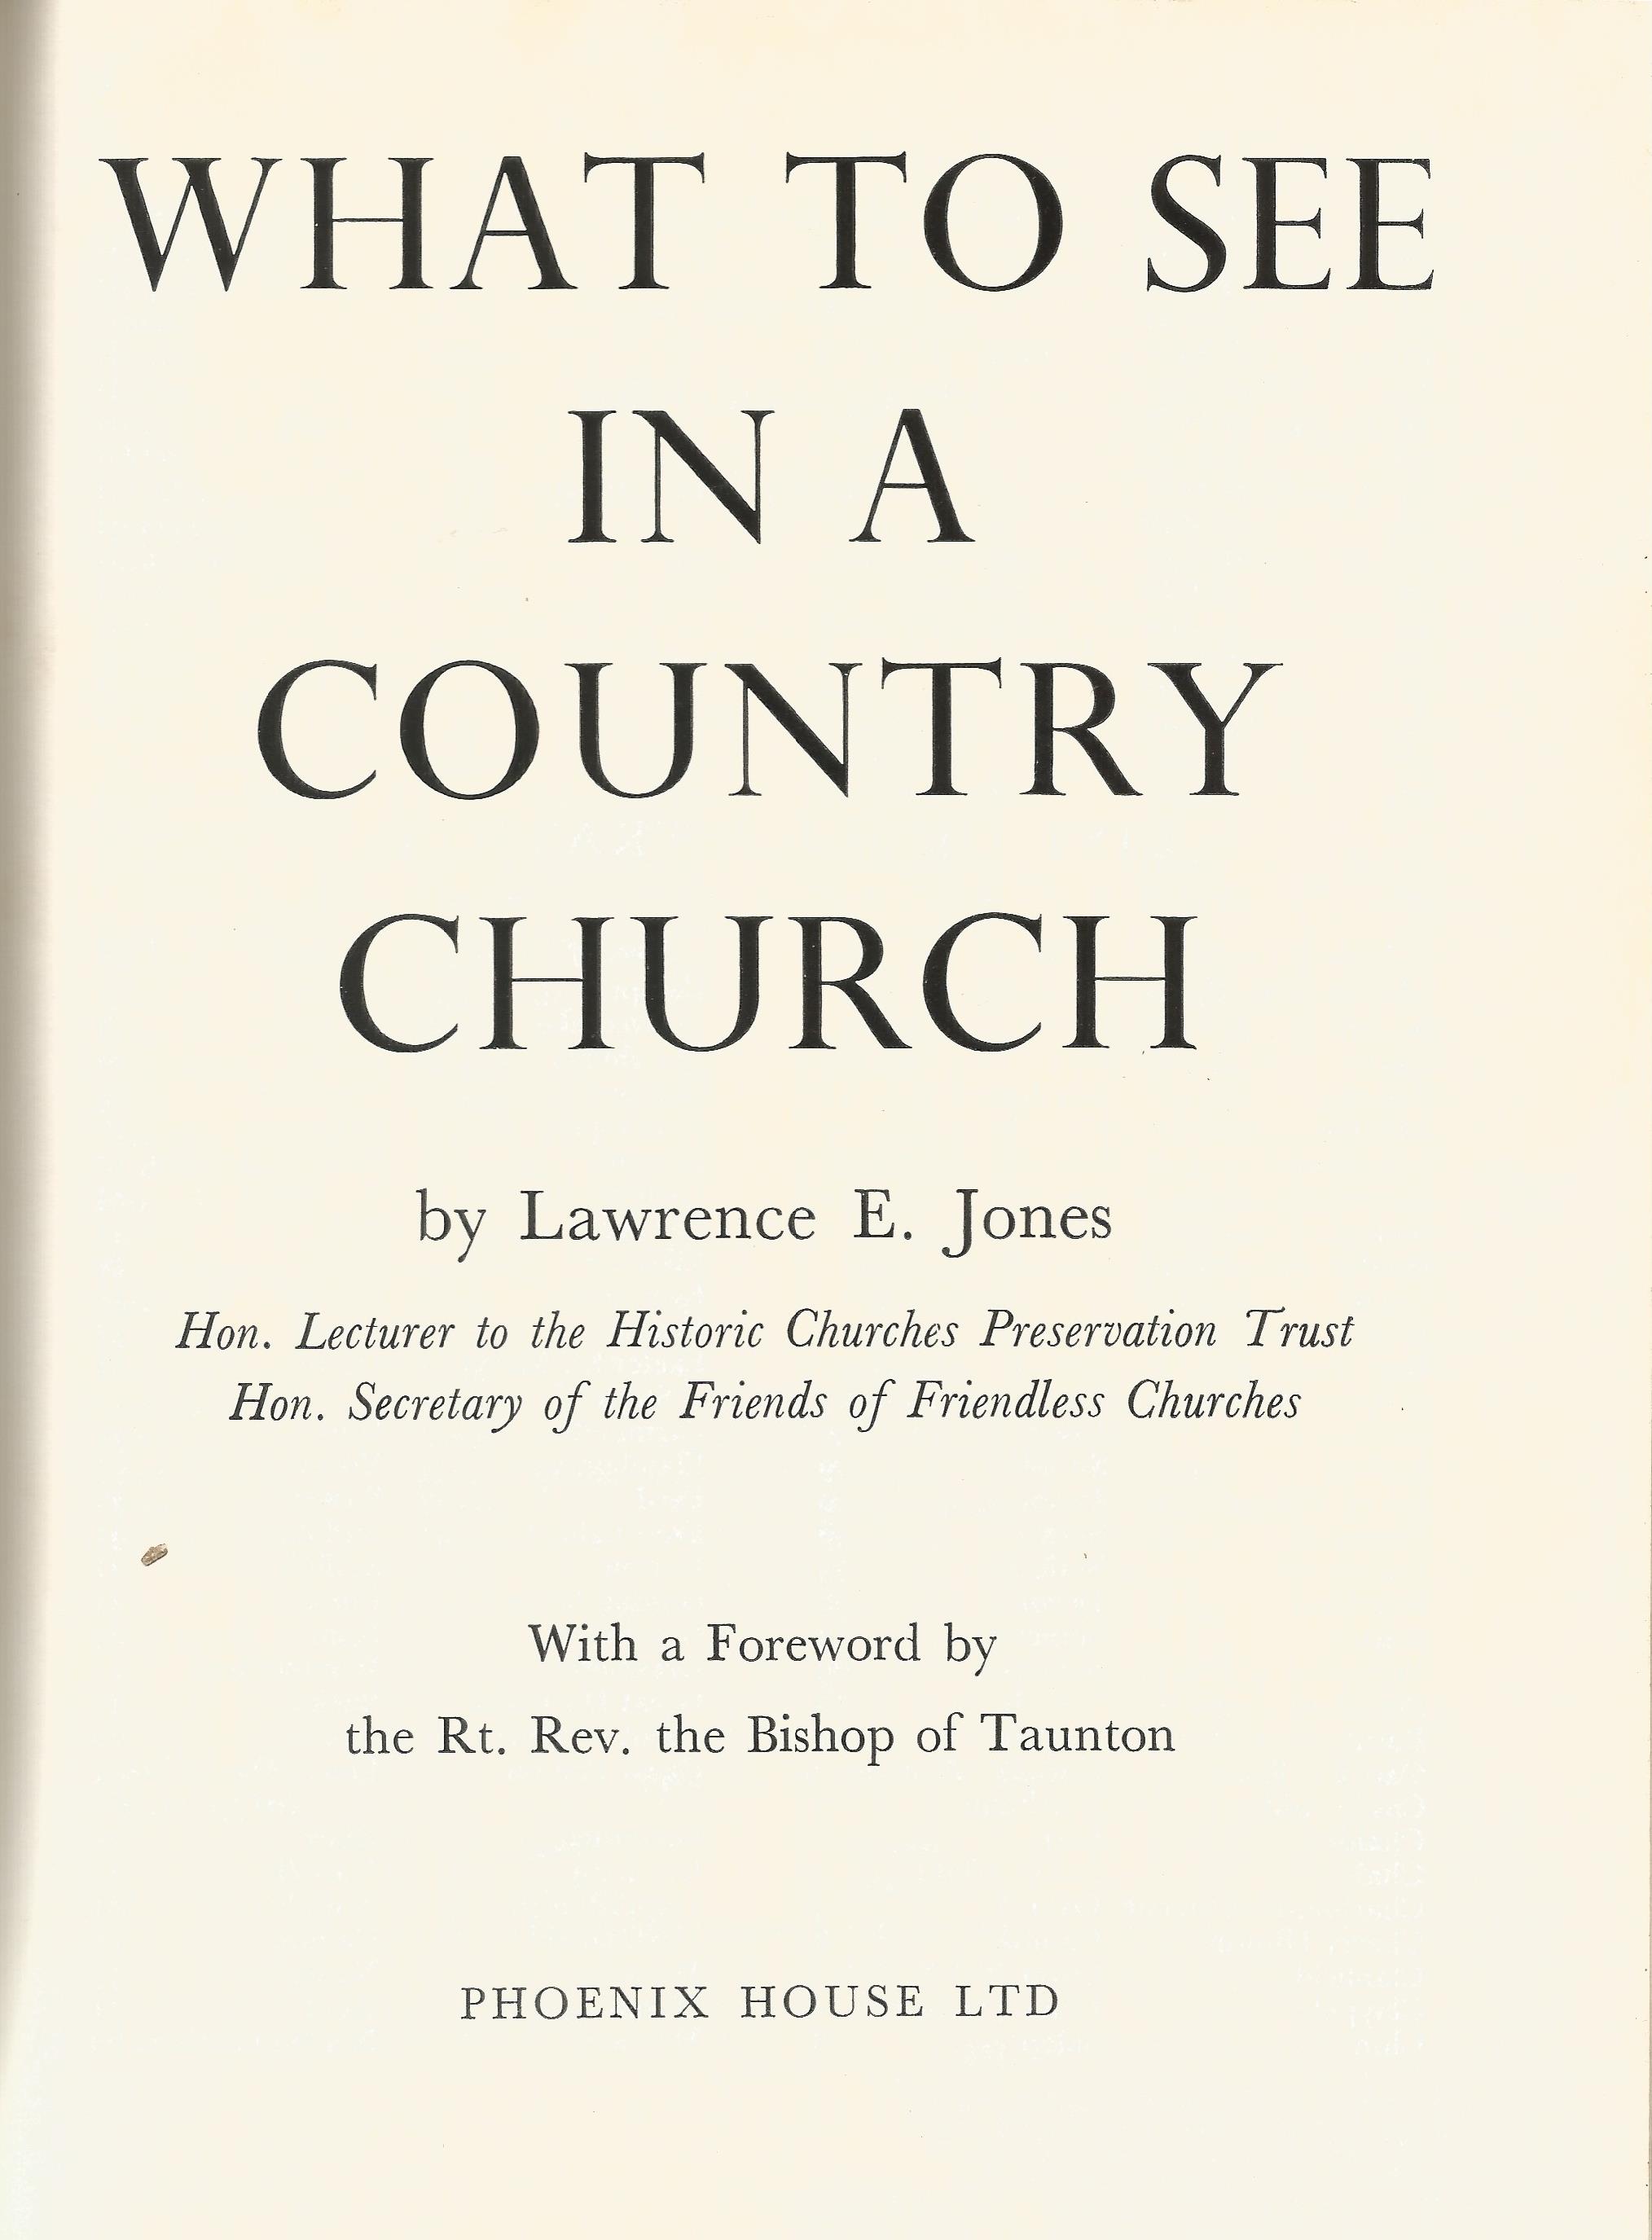 What to see in a Country Church by Lawrence E Jones (second Edition Revised) 1961 Hardback Book - Image 2 of 3